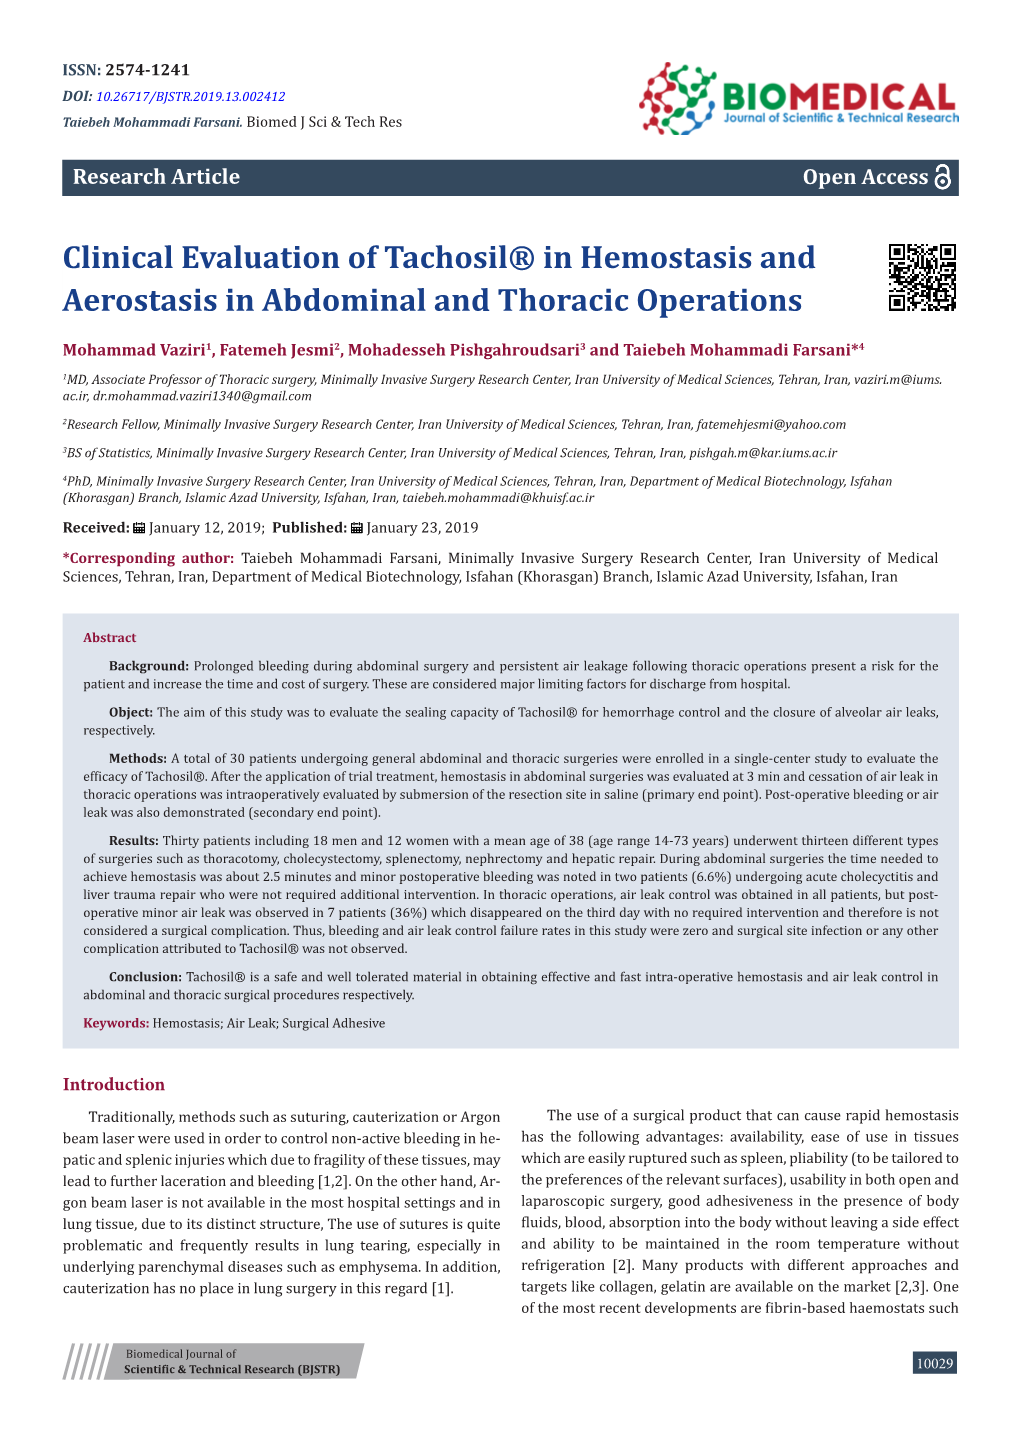 Clinical Evaluation of Tachosil® in Hemostasis and Aerostasis in Abdominal and Thoracic Operations